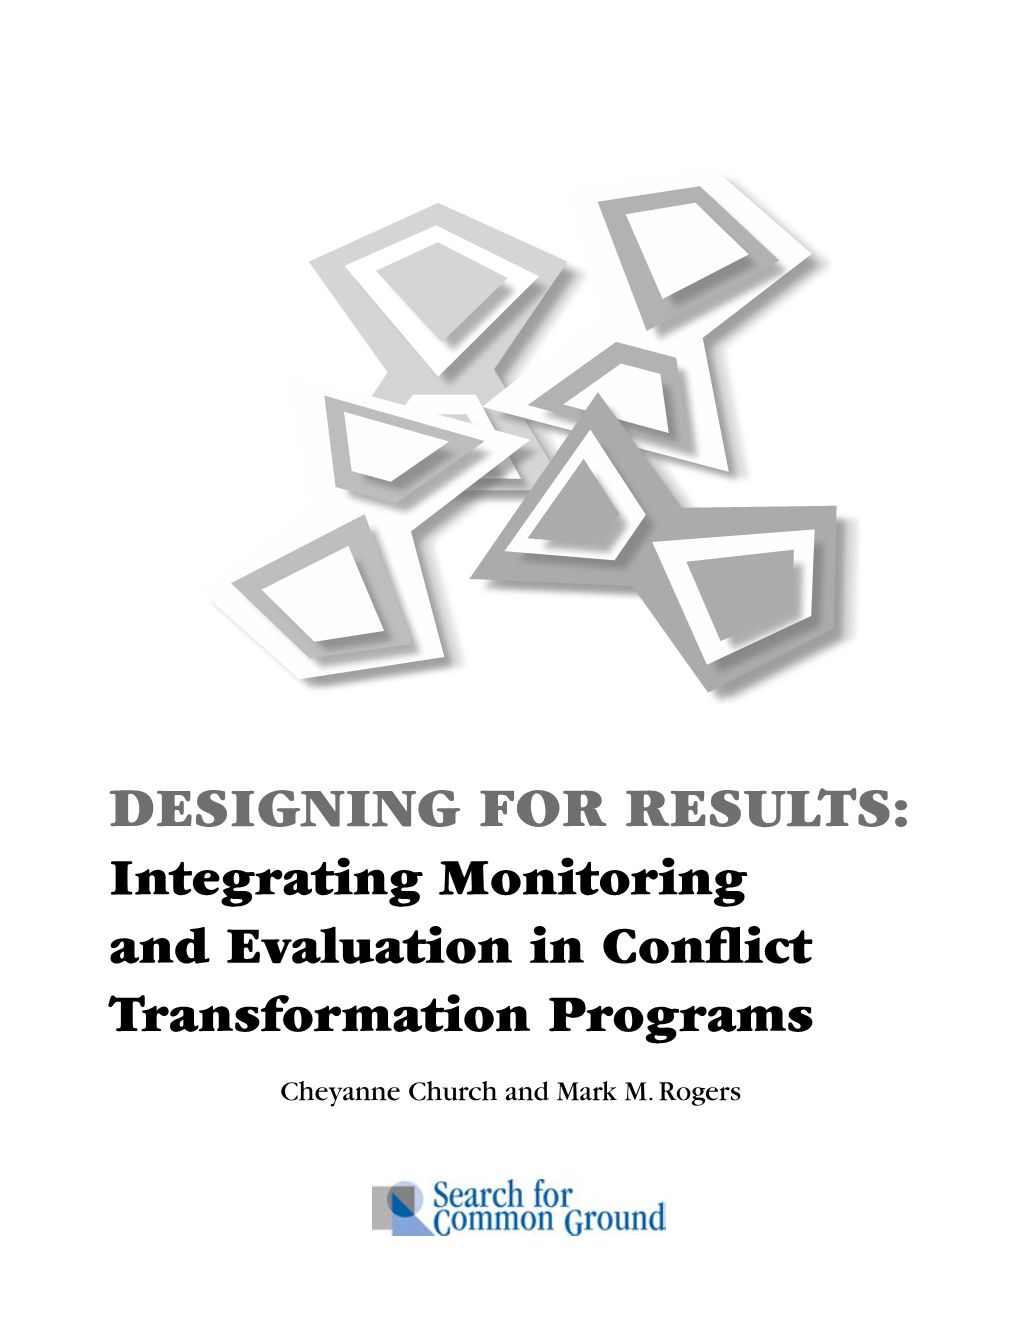 DESIGNING for RESULTS: Integrating Monitoring and Evaluation in Conflict Transformation Programs